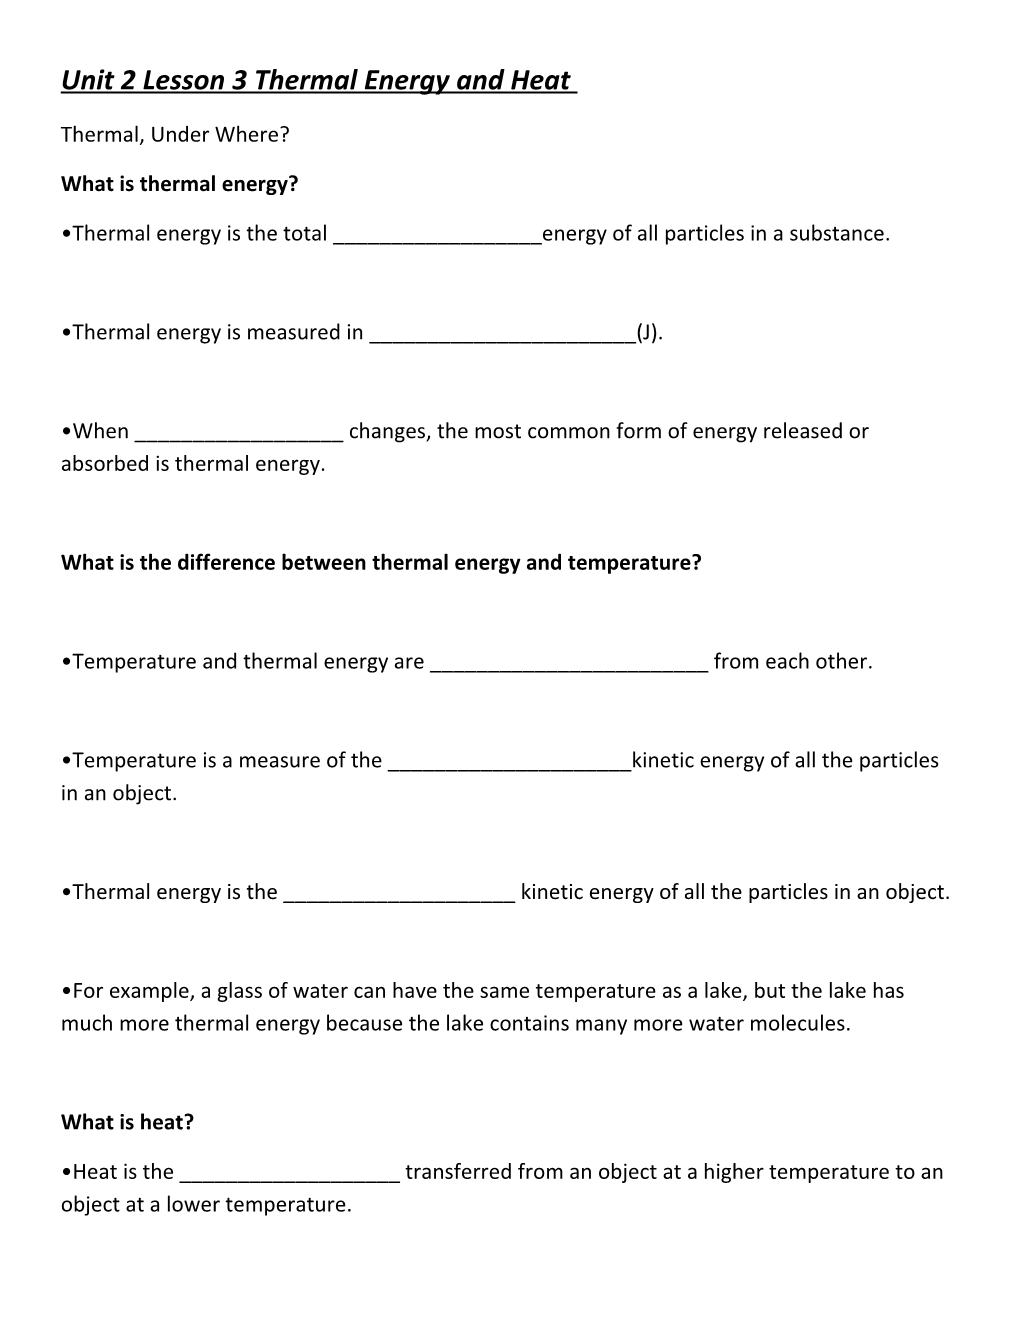 Unit 2 Lesson 3 Thermal Energy and Heat